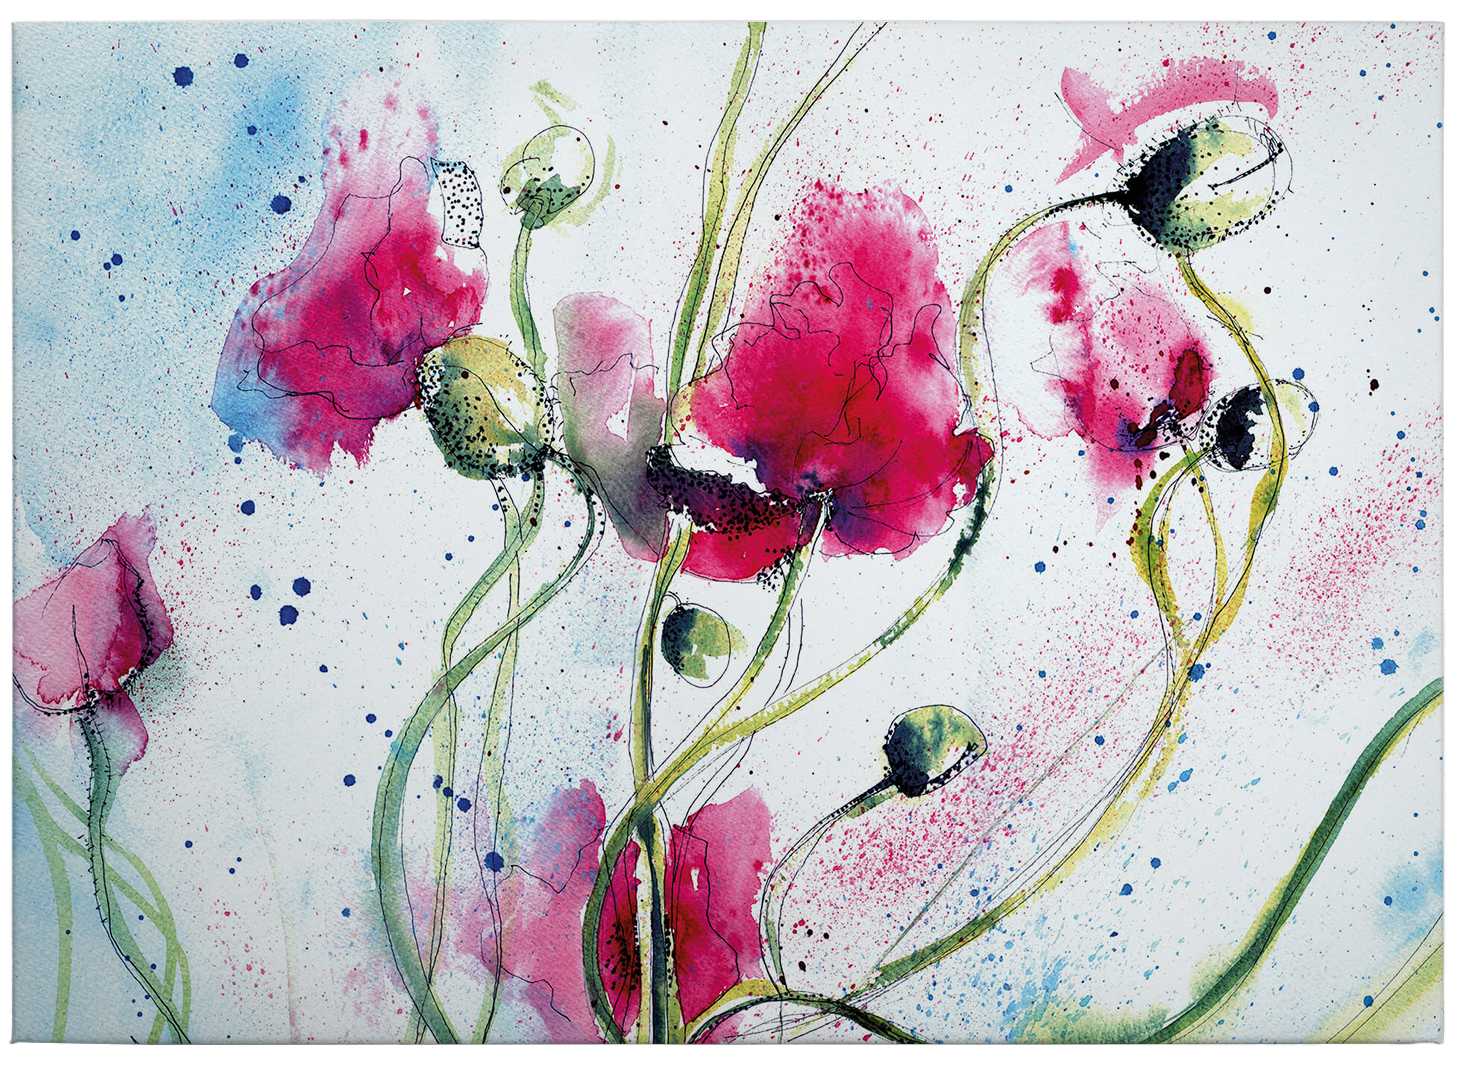             Canvas print poppies, bright watercolour painting
        